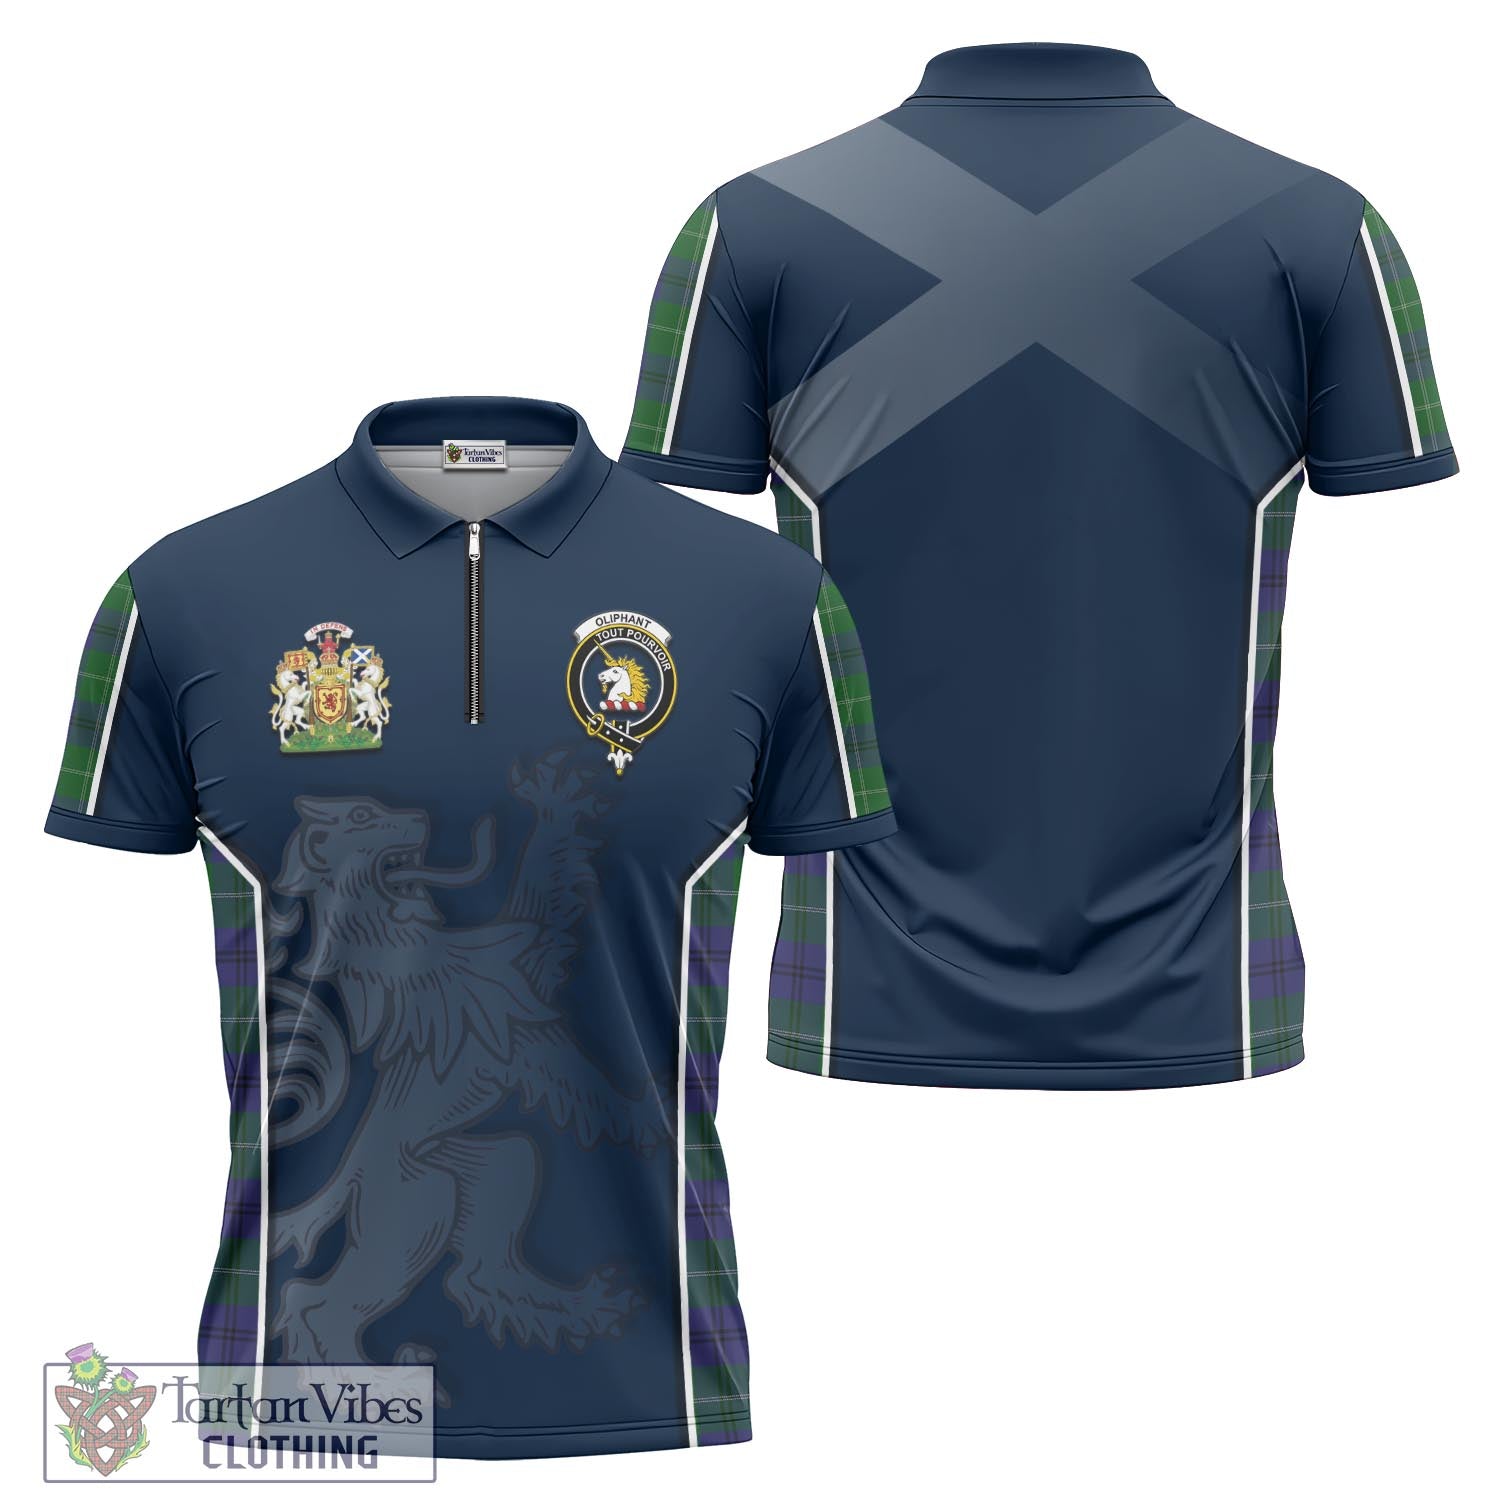 Tartan Vibes Clothing Oliphant Tartan Zipper Polo Shirt with Family Crest and Lion Rampant Vibes Sport Style